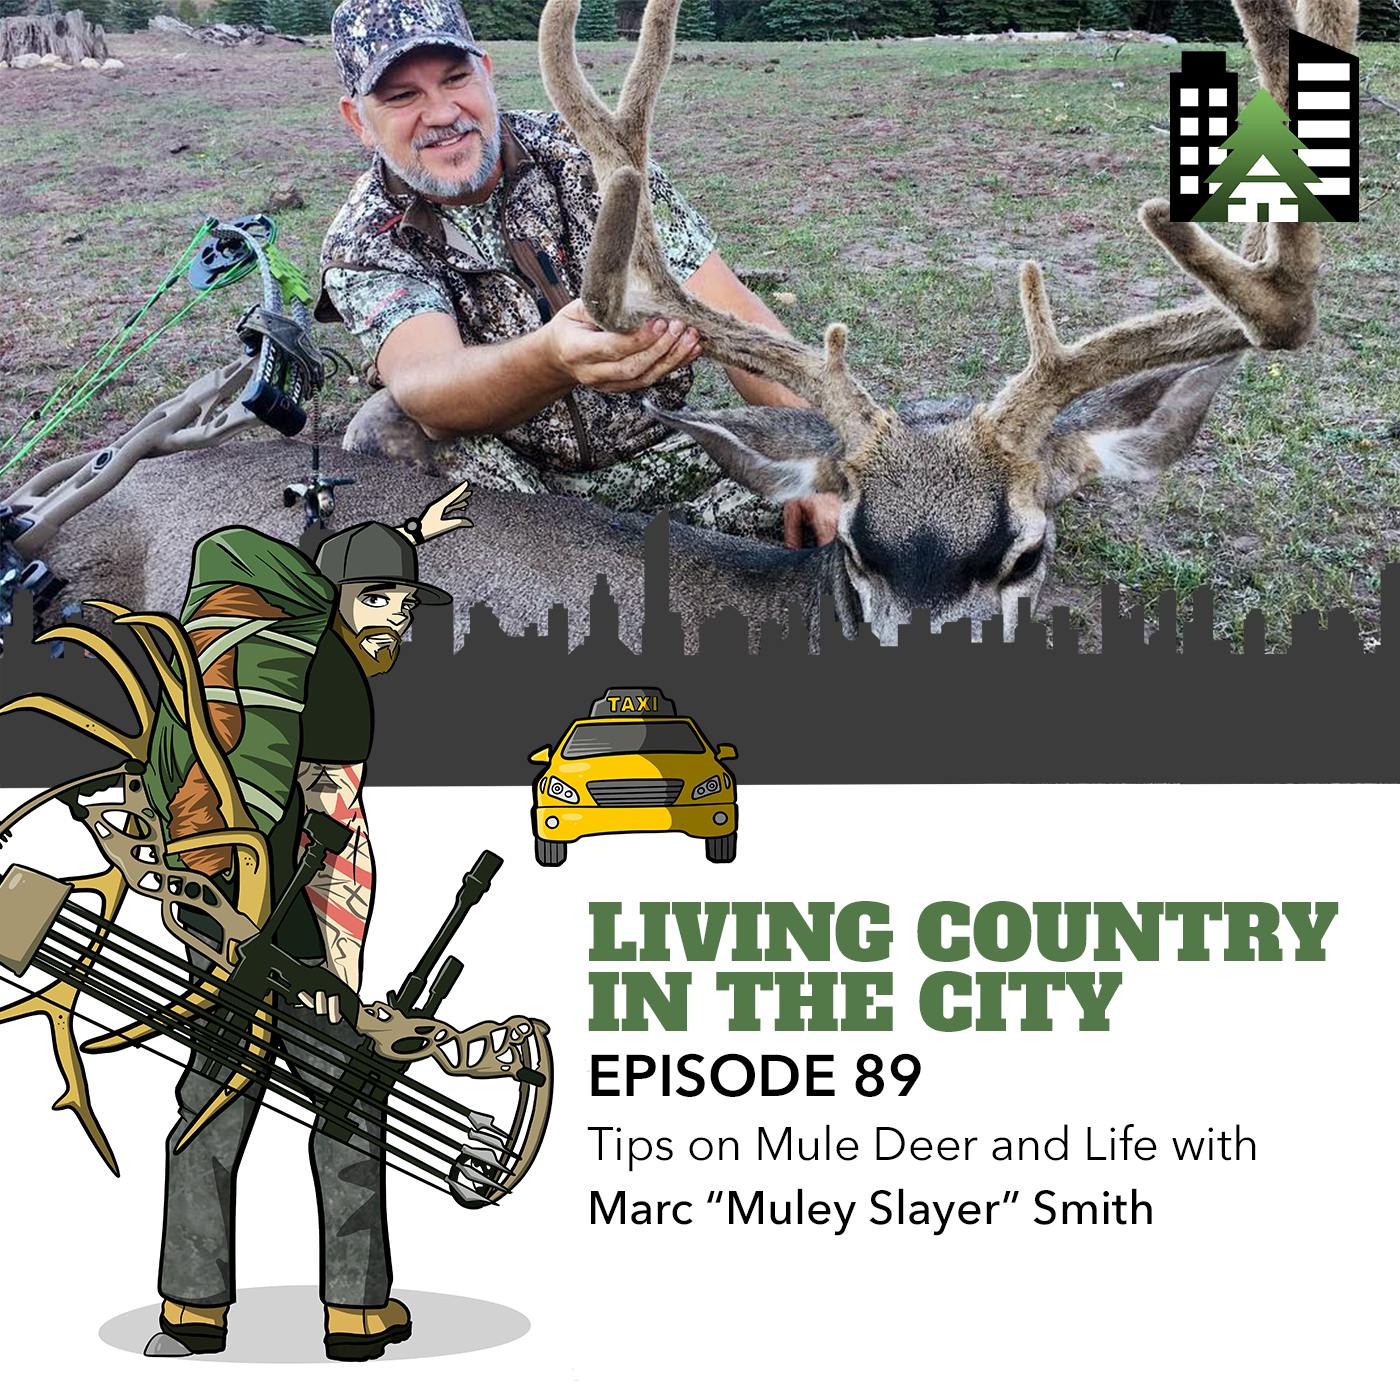 Ep 89 - Tips on Mule Deer and Life with Marc “Muley Slayer” Smith